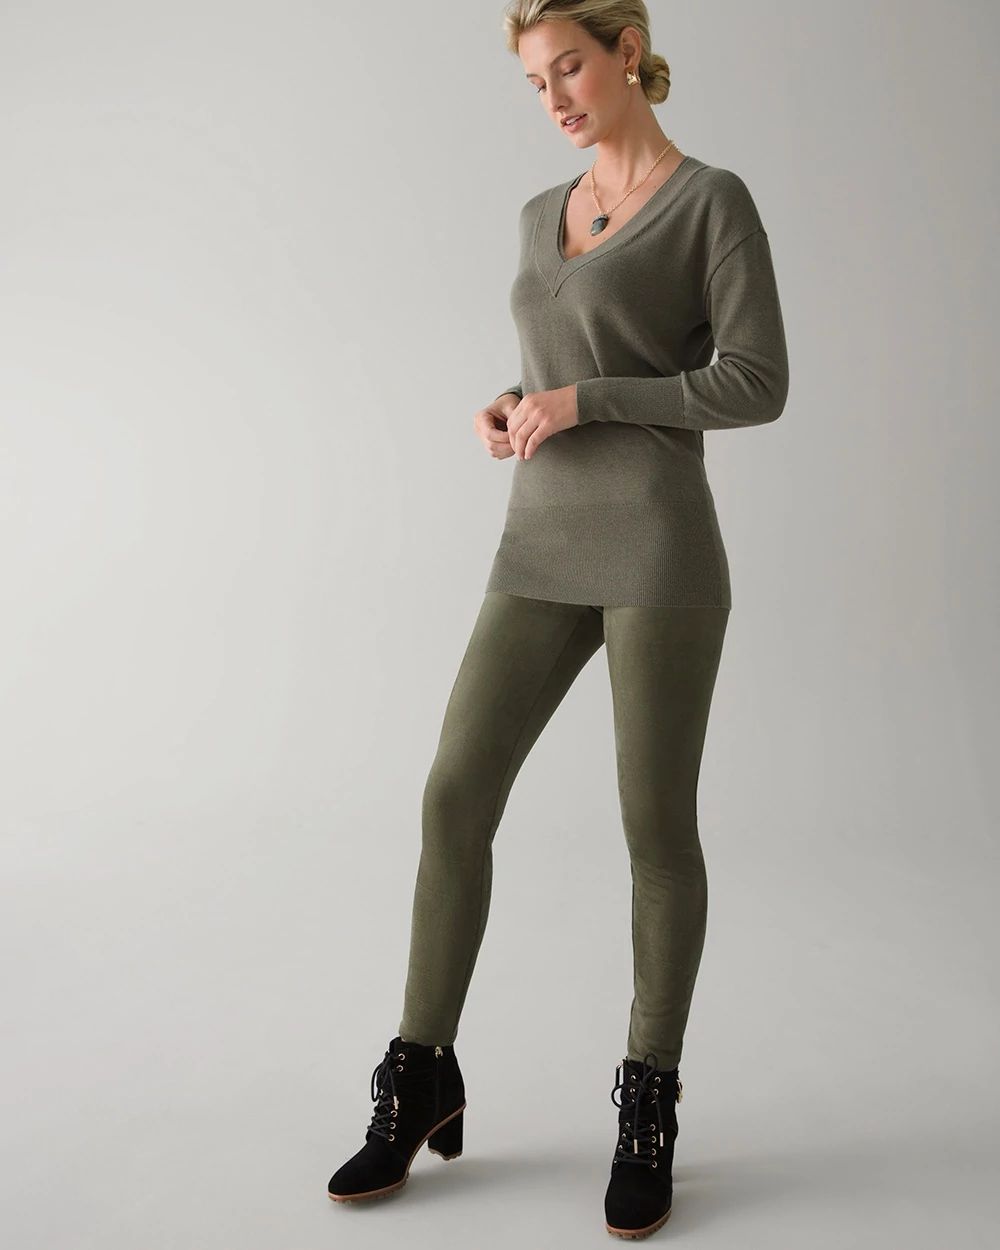 Faux-Suede WHBM Runway Leggings click to view larger image.